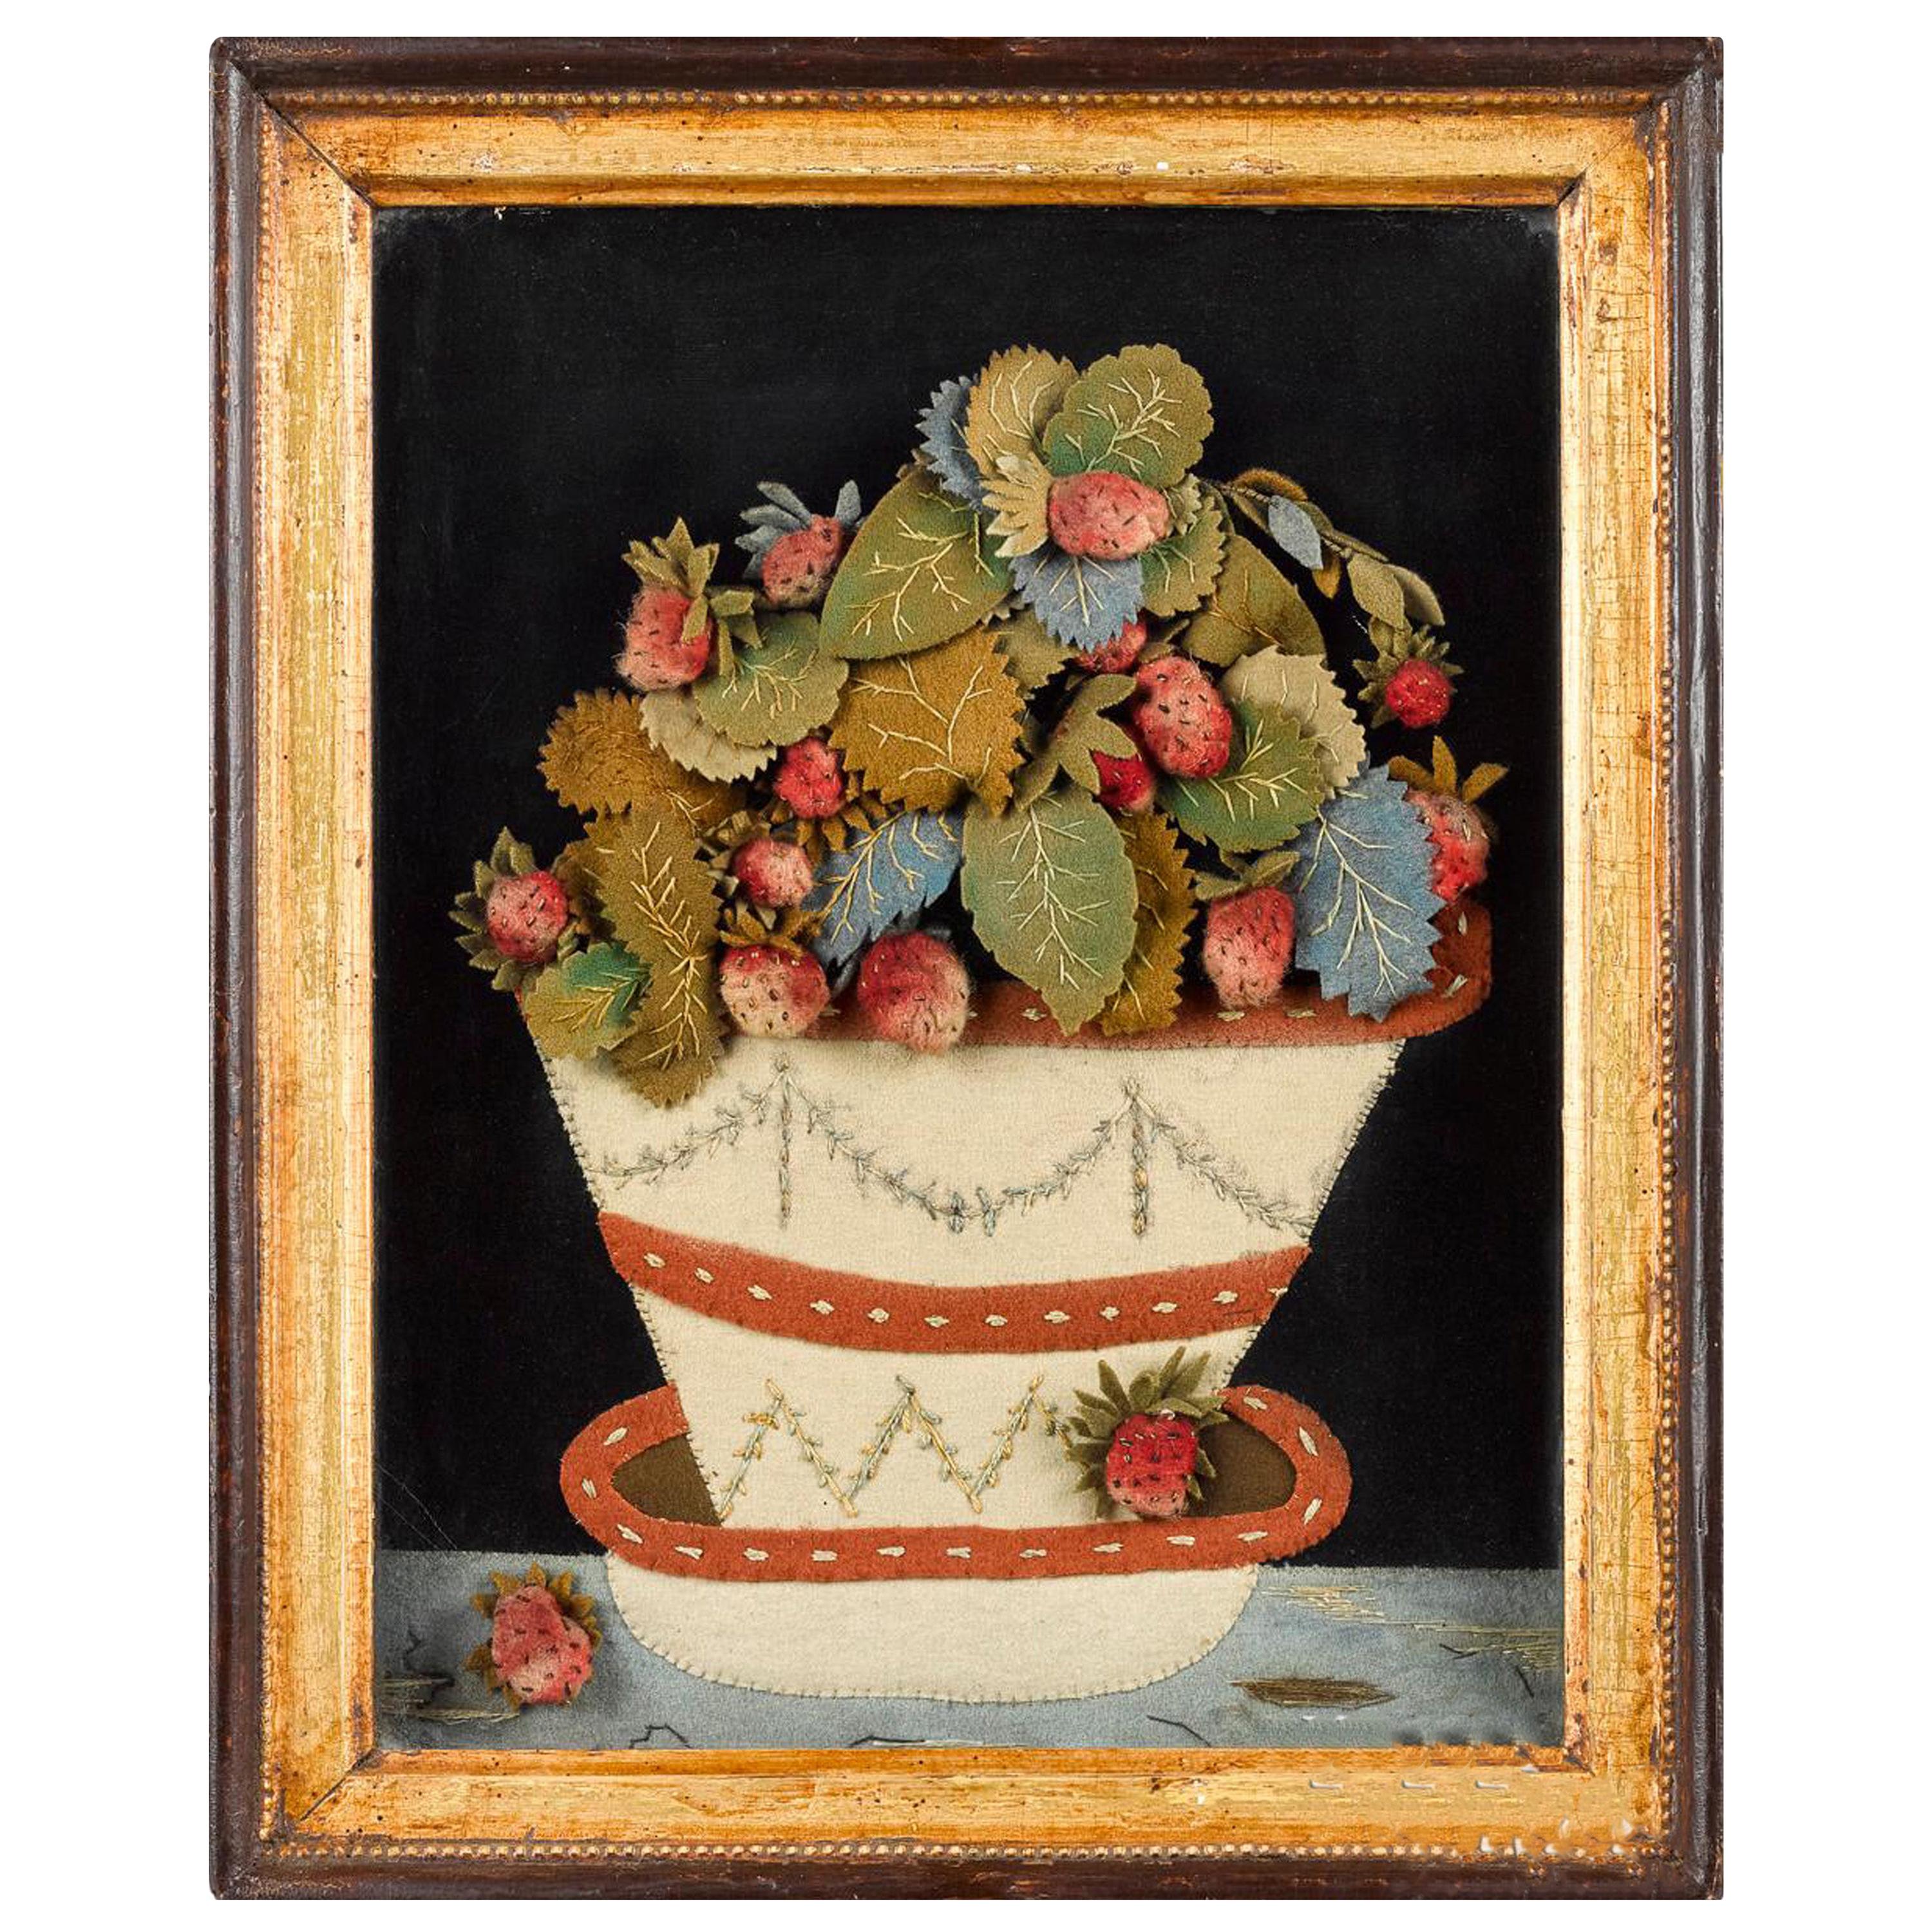 Antique Textile Feltwork Picture of a Strawberry Plant in Pot, Possibly American